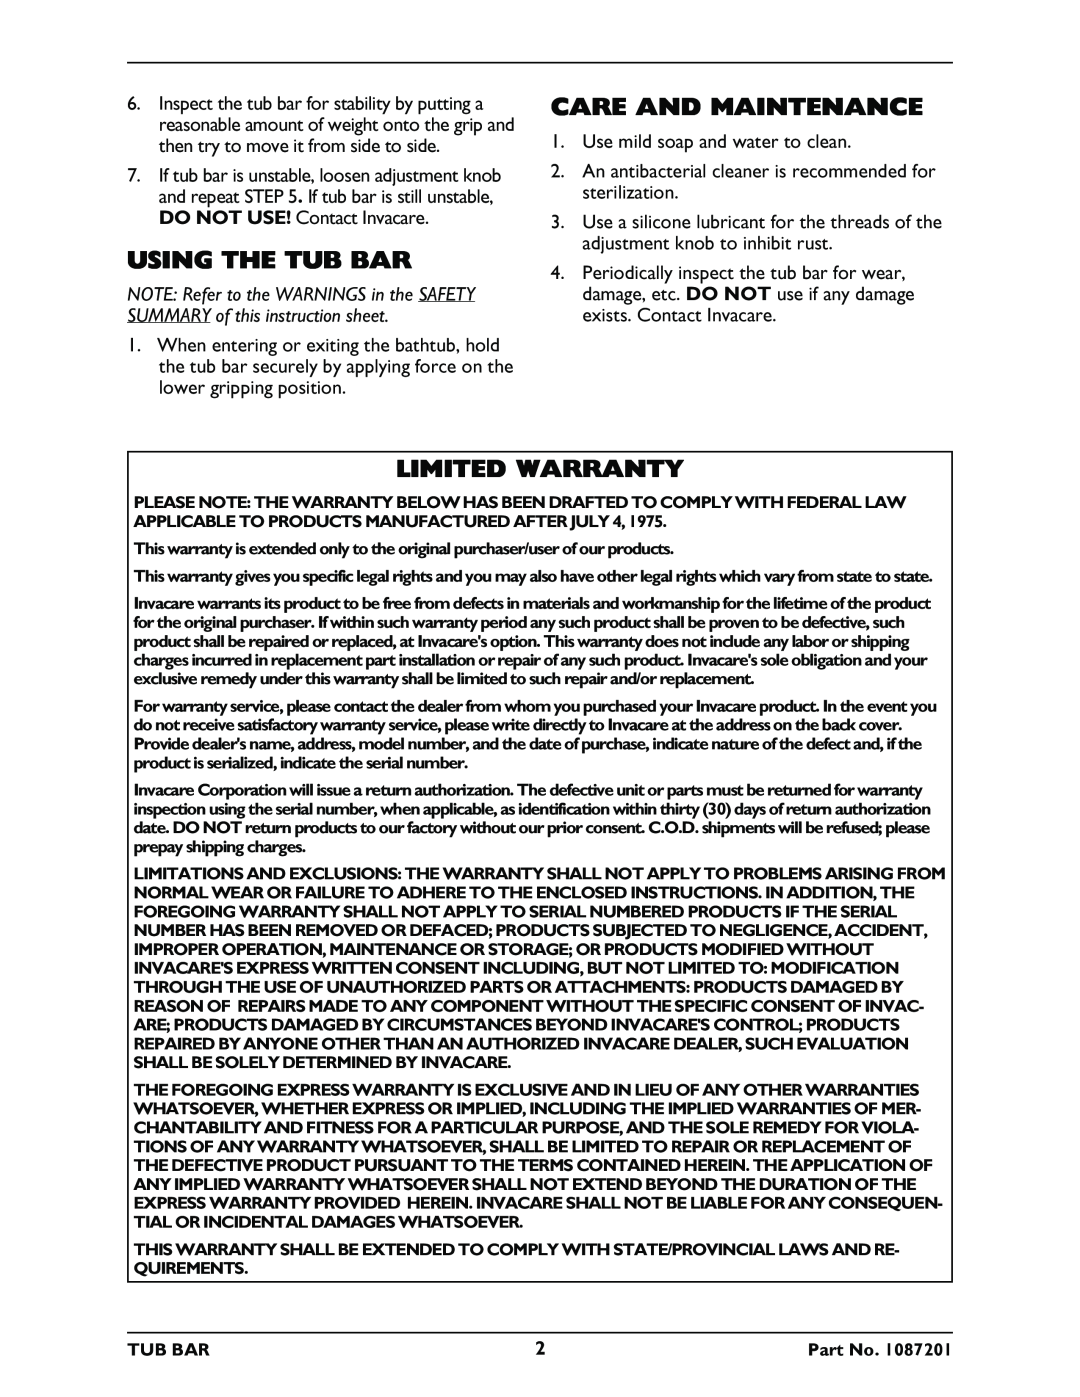 Invacare 705 instruction sheet Using The Tub Bar, Care And Maintenance, Limited Warranty 